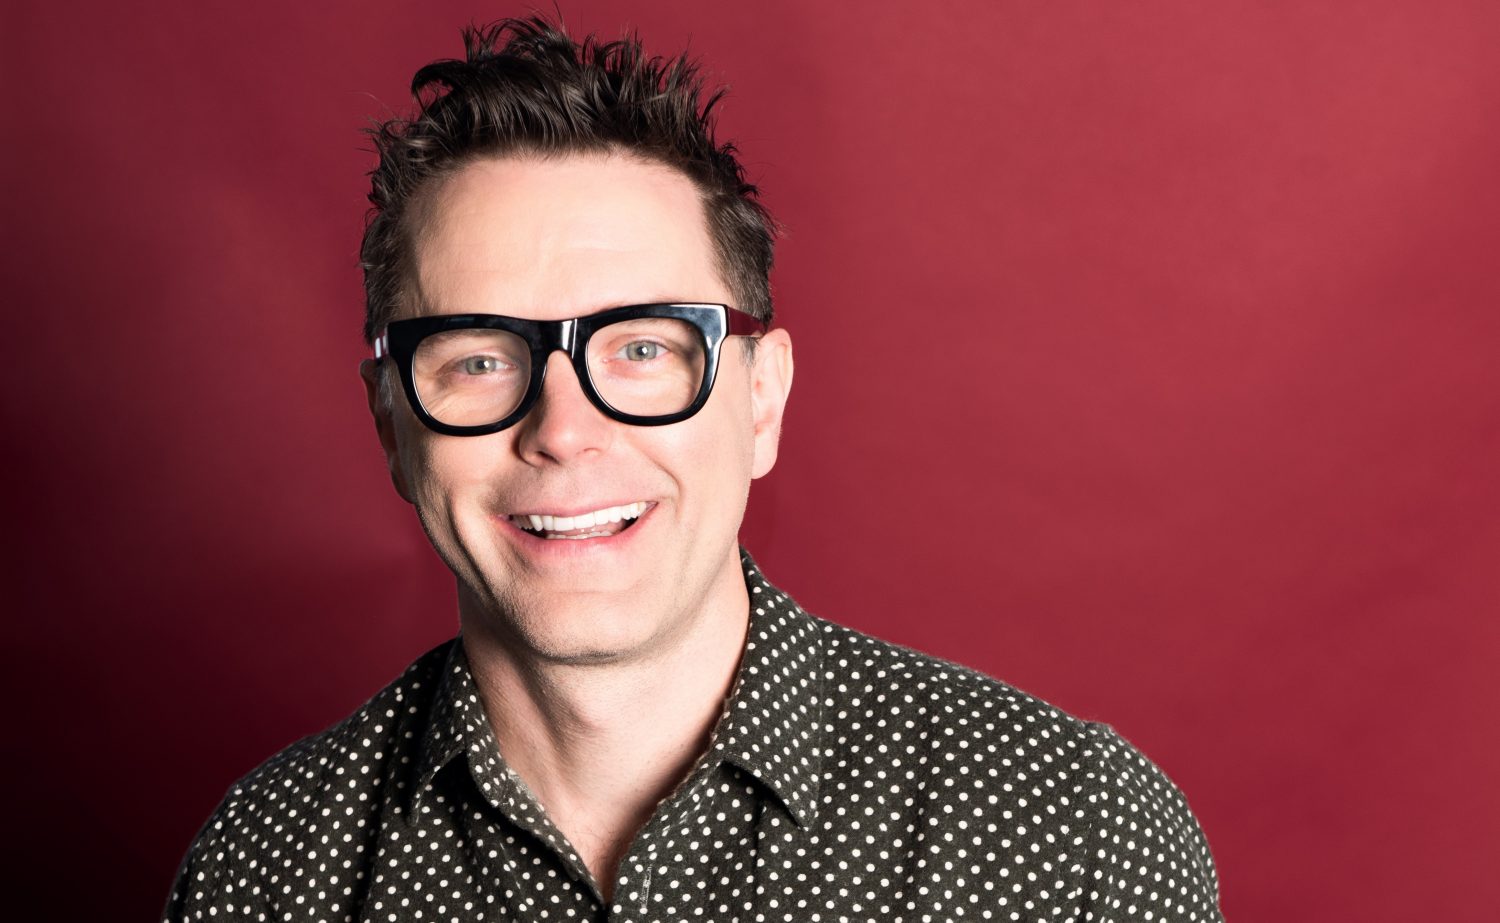 Bobby Bones Reveals How He Got His Name, Promotes New Book on ‘TODAY